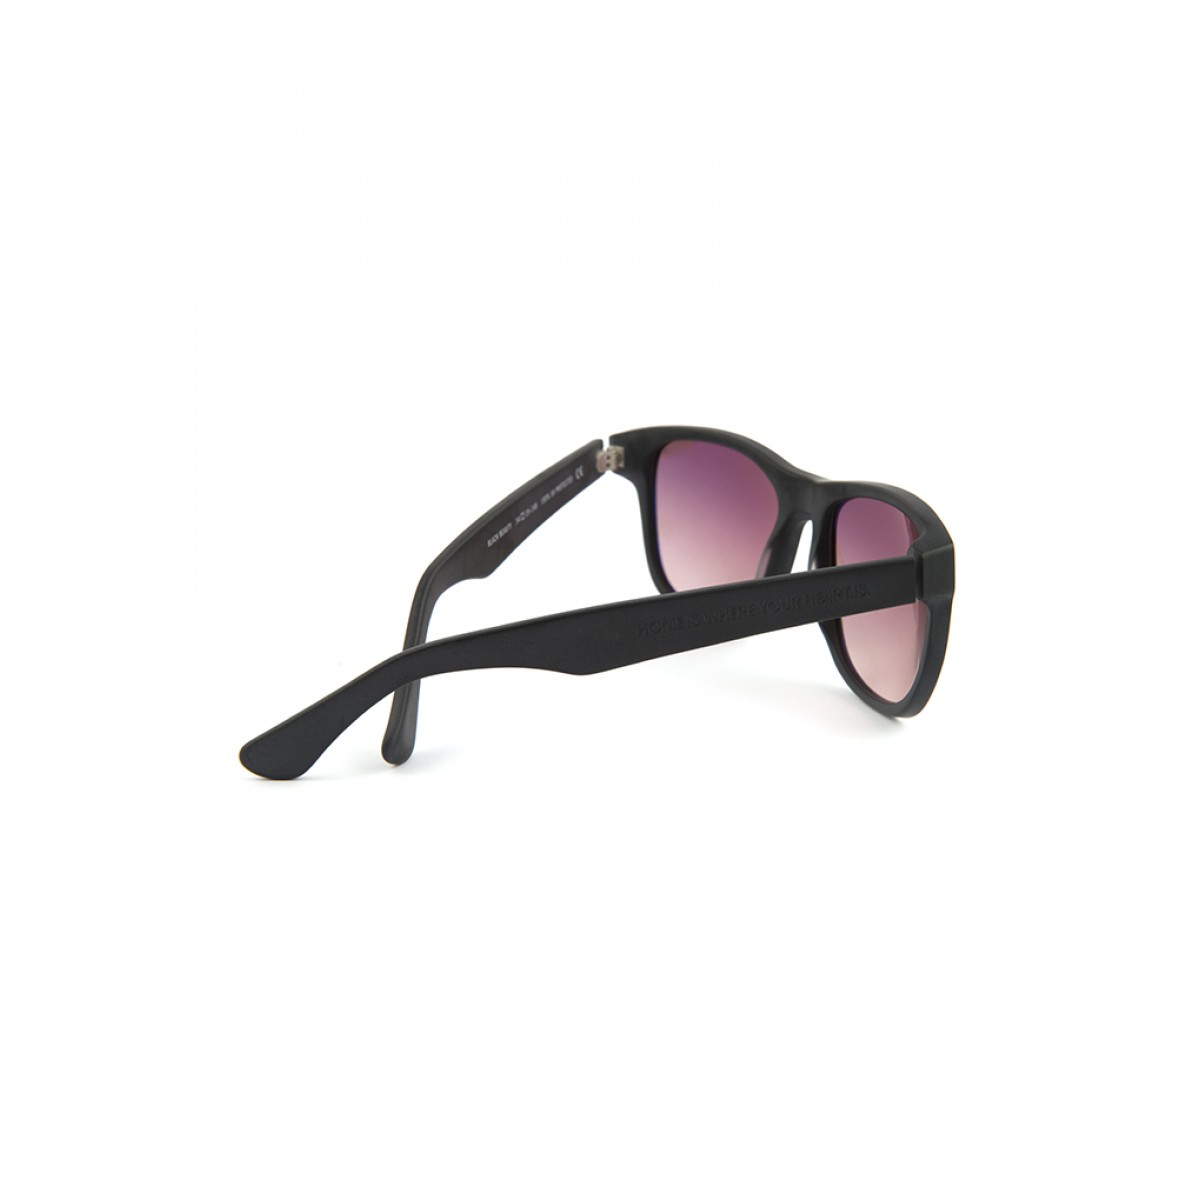 HOME IS WHERE YOUR HEART IS. – Acetat Sonnenbrille "BLACK BEAUTY I"